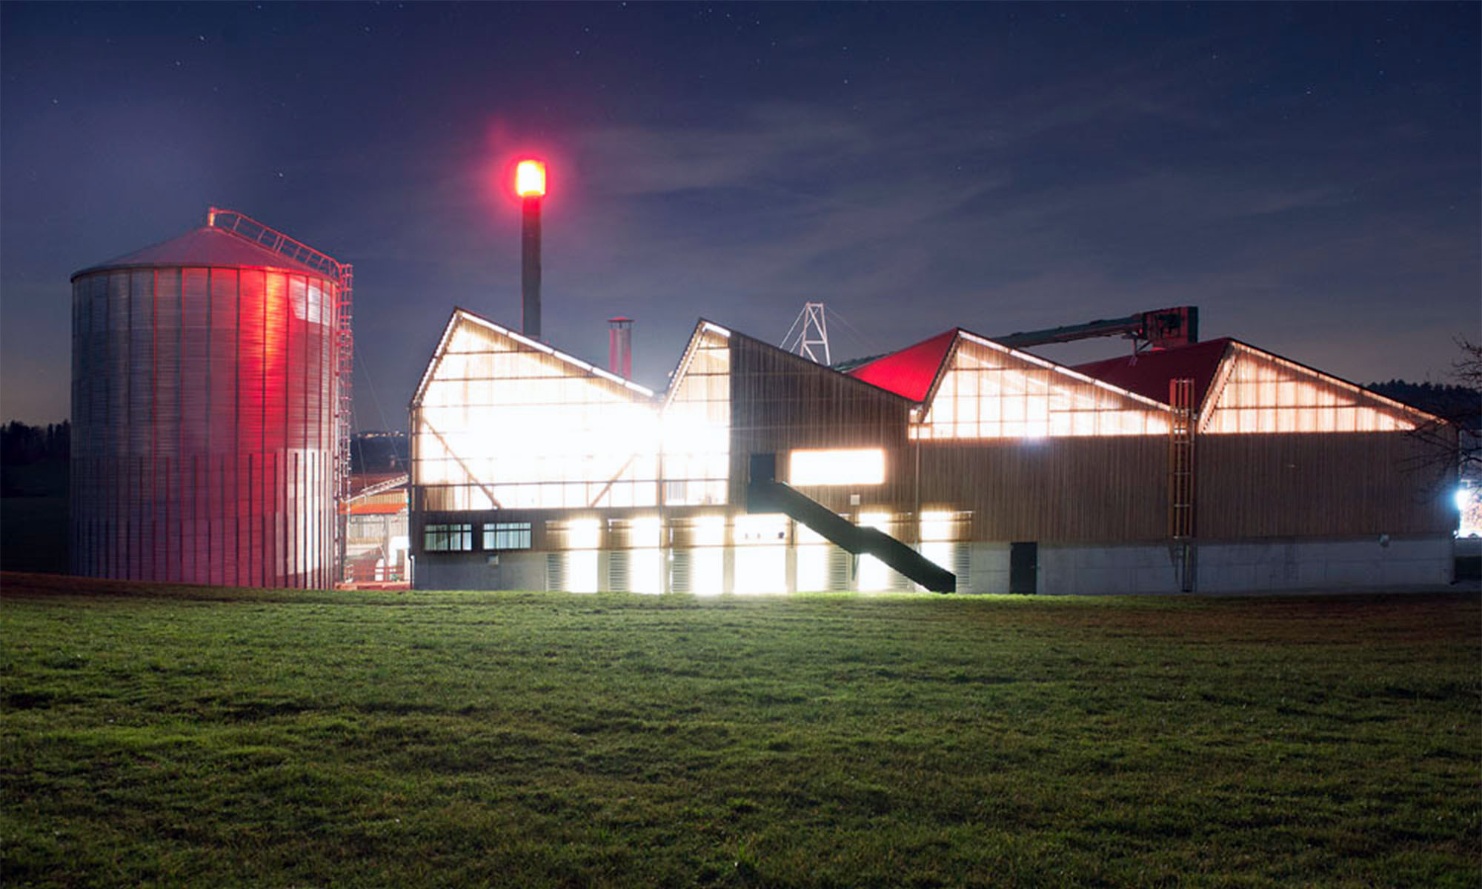 Night-time picture of the illuminated power plant building at Erlenhof